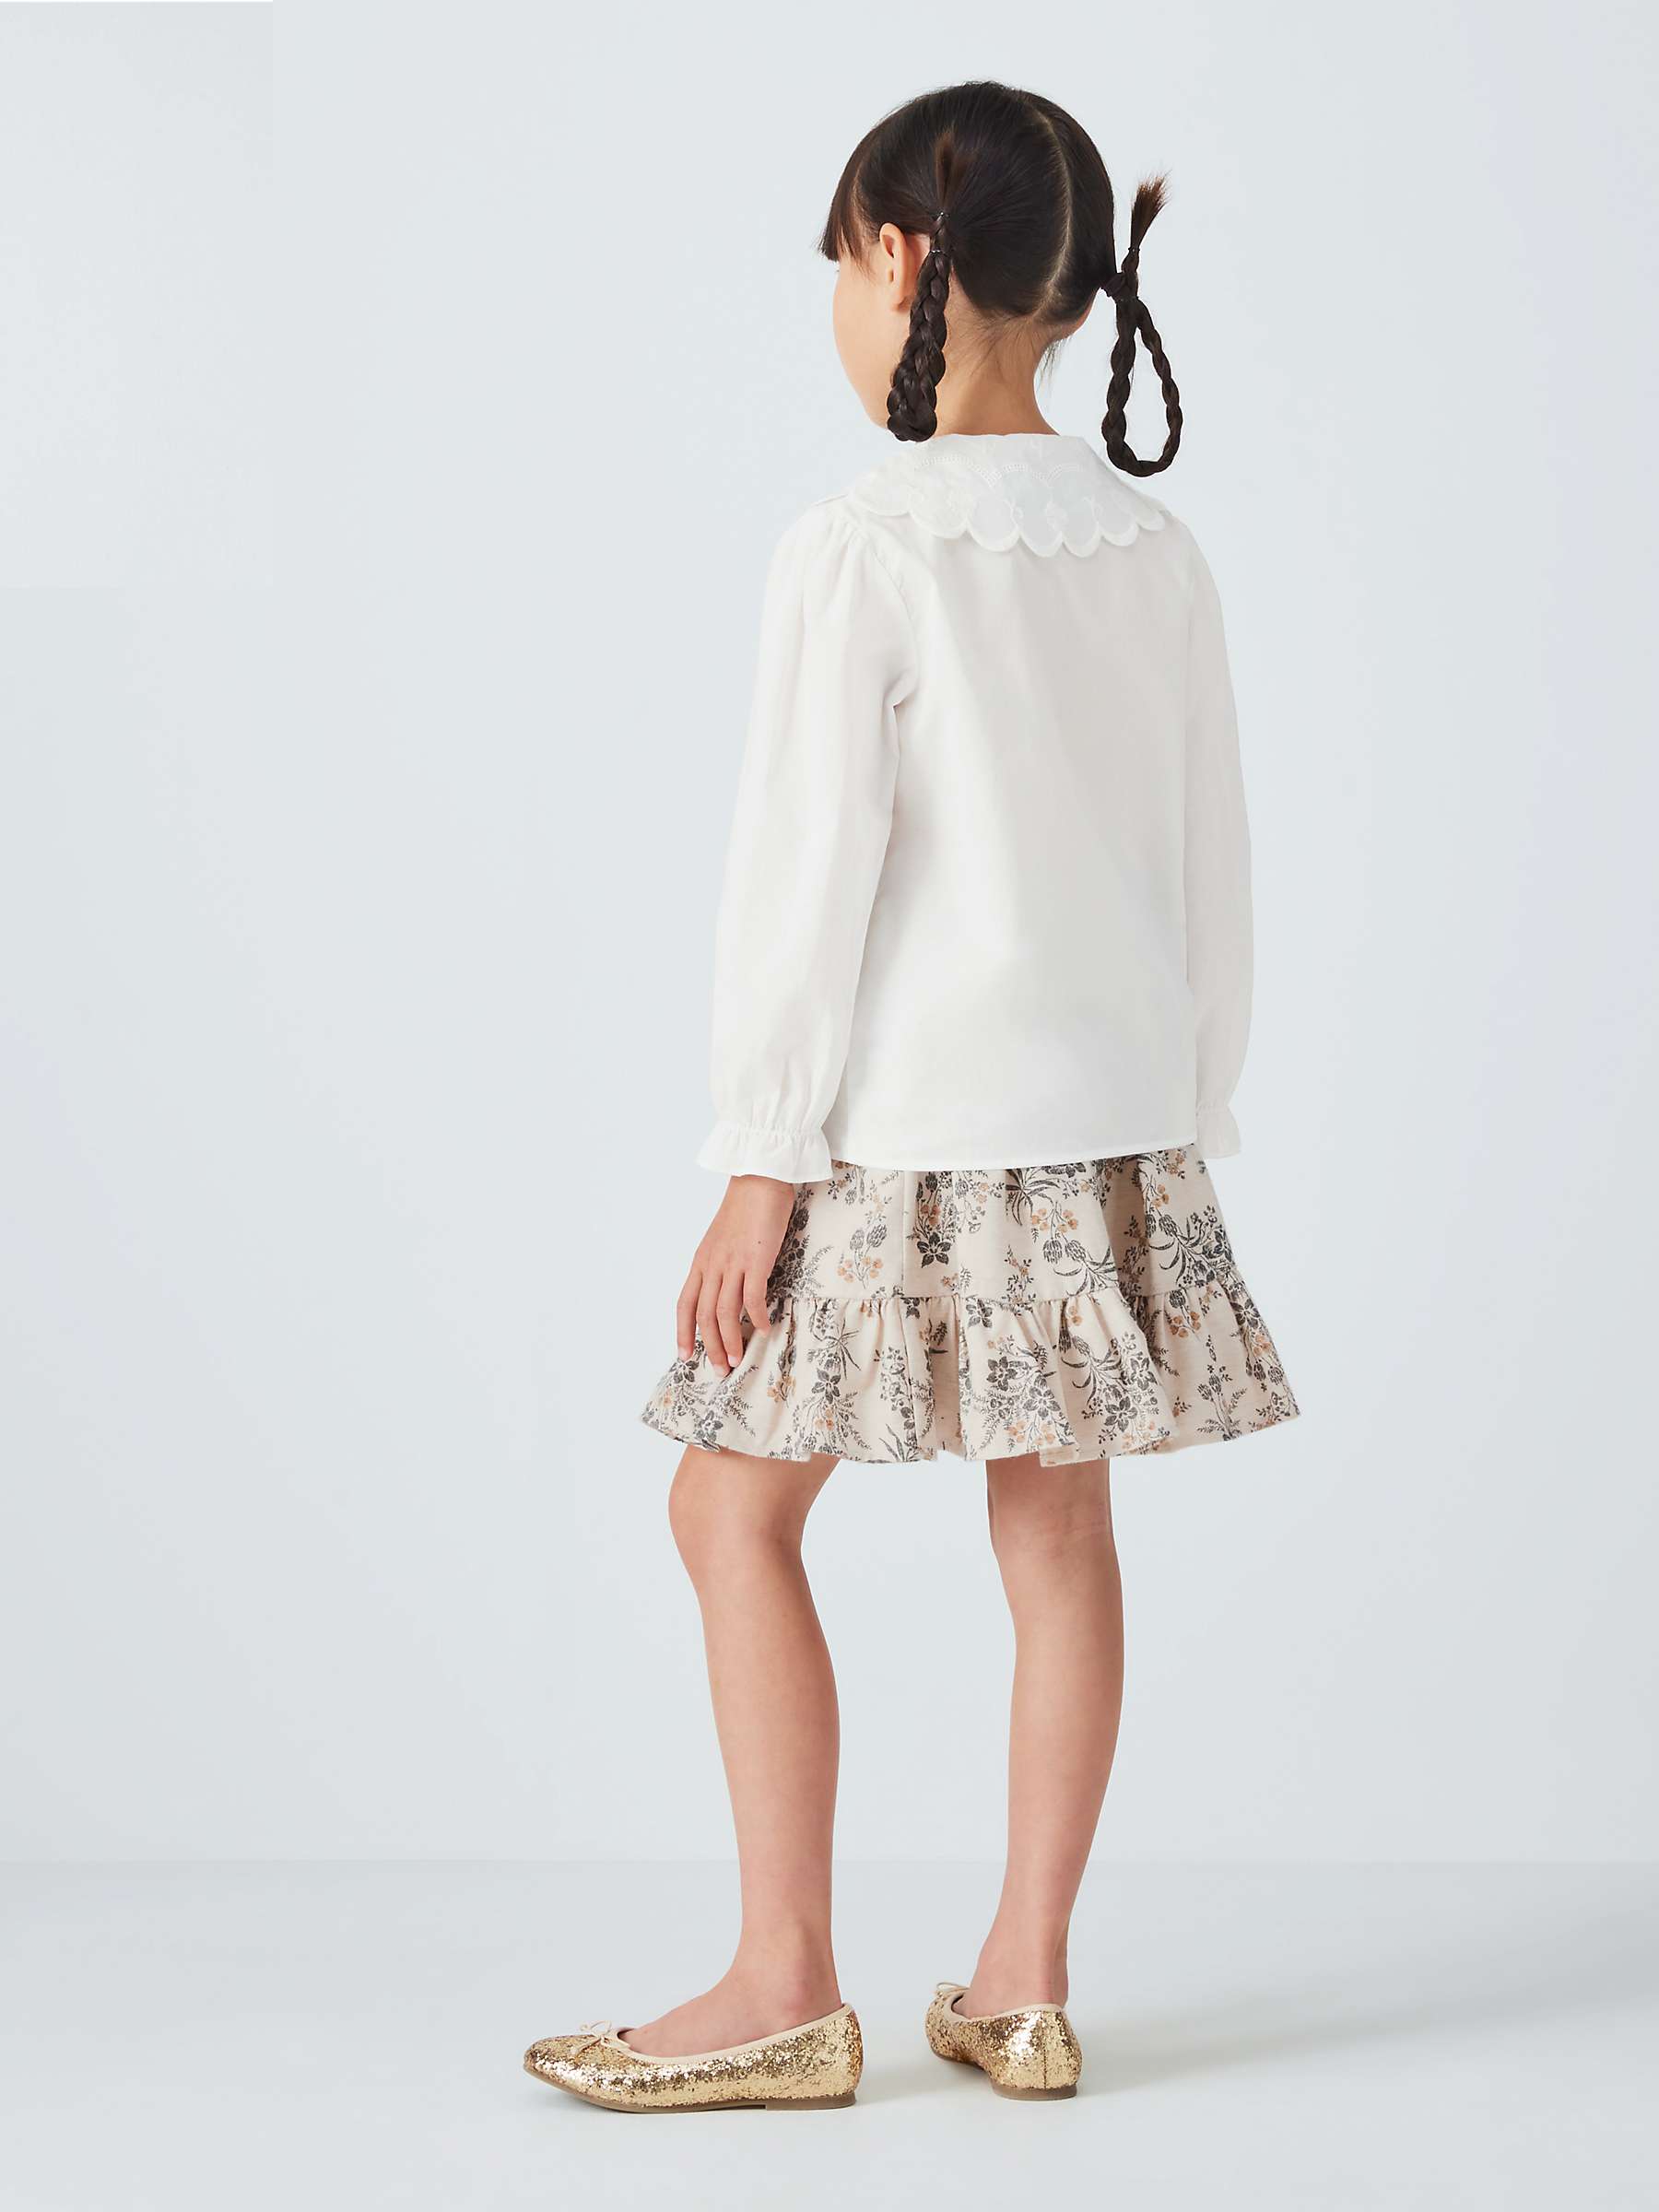 Buy John Lewis Heirloom Collection Kids' Lace Cotton Blouse, Cream Online at johnlewis.com